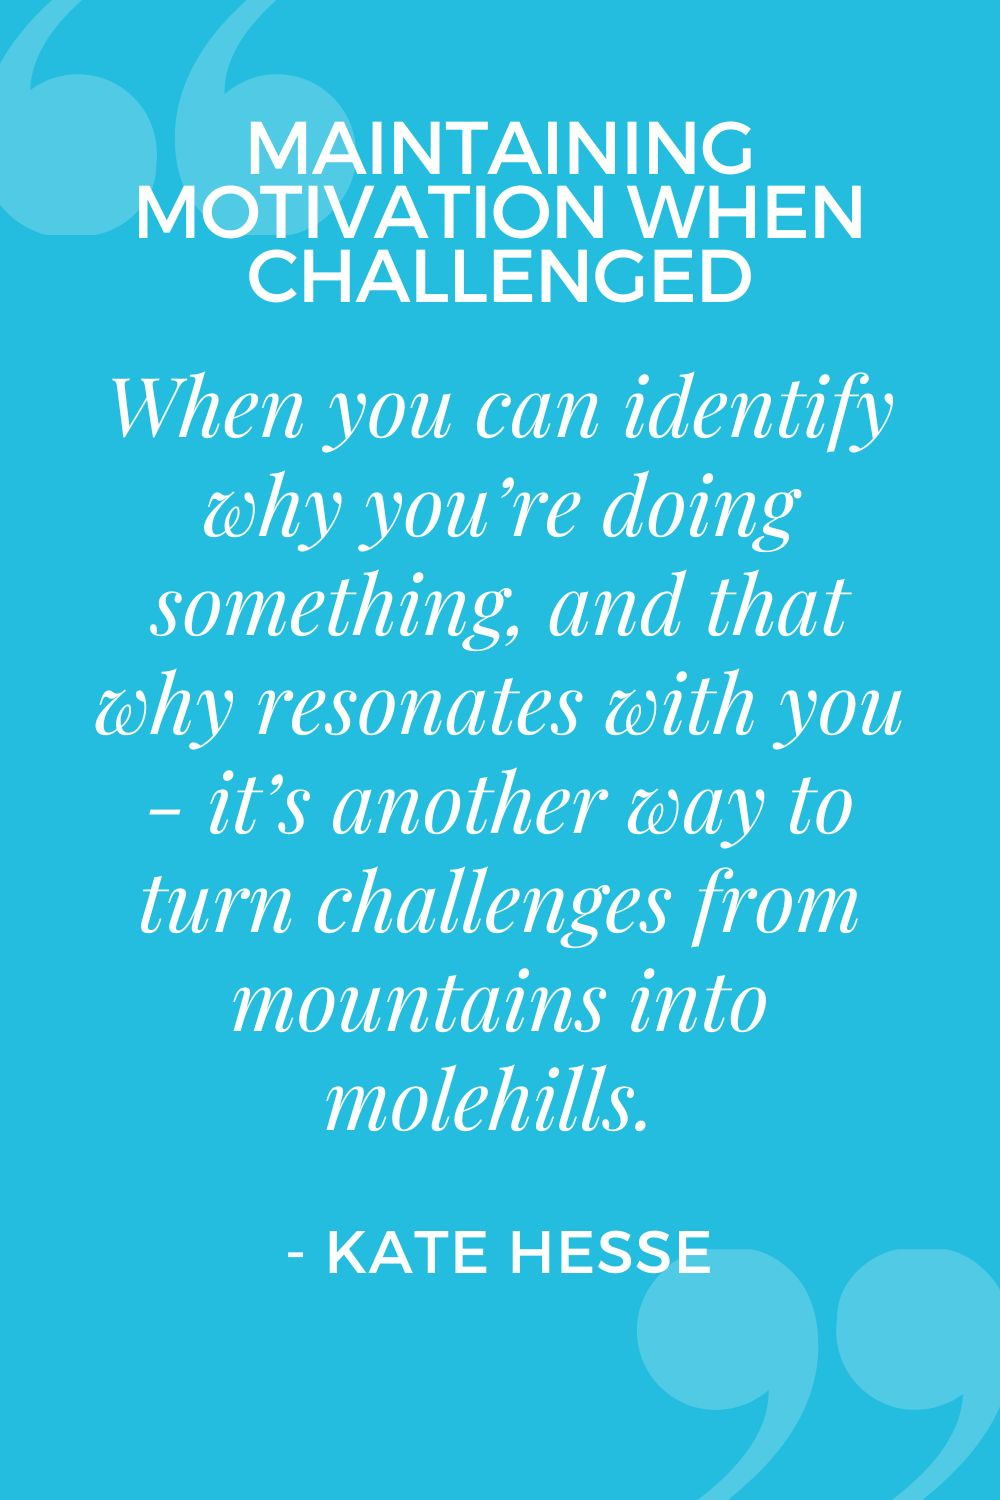 When you can identify why you're doing something, and that why resonates with you - it's another way to turn challenges from mountains into molehills.